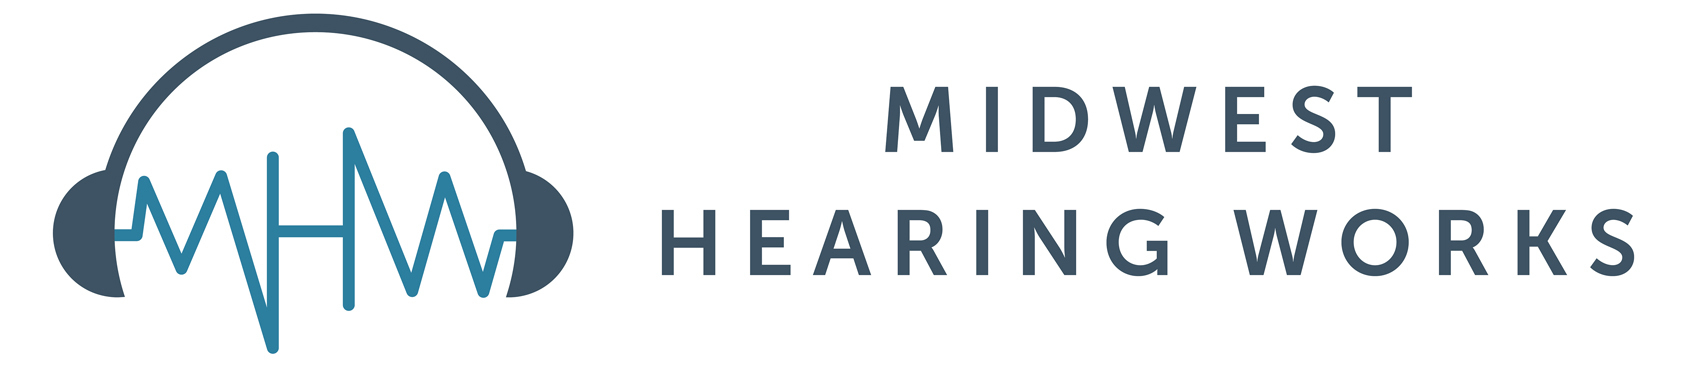 Midwest Hearing Works